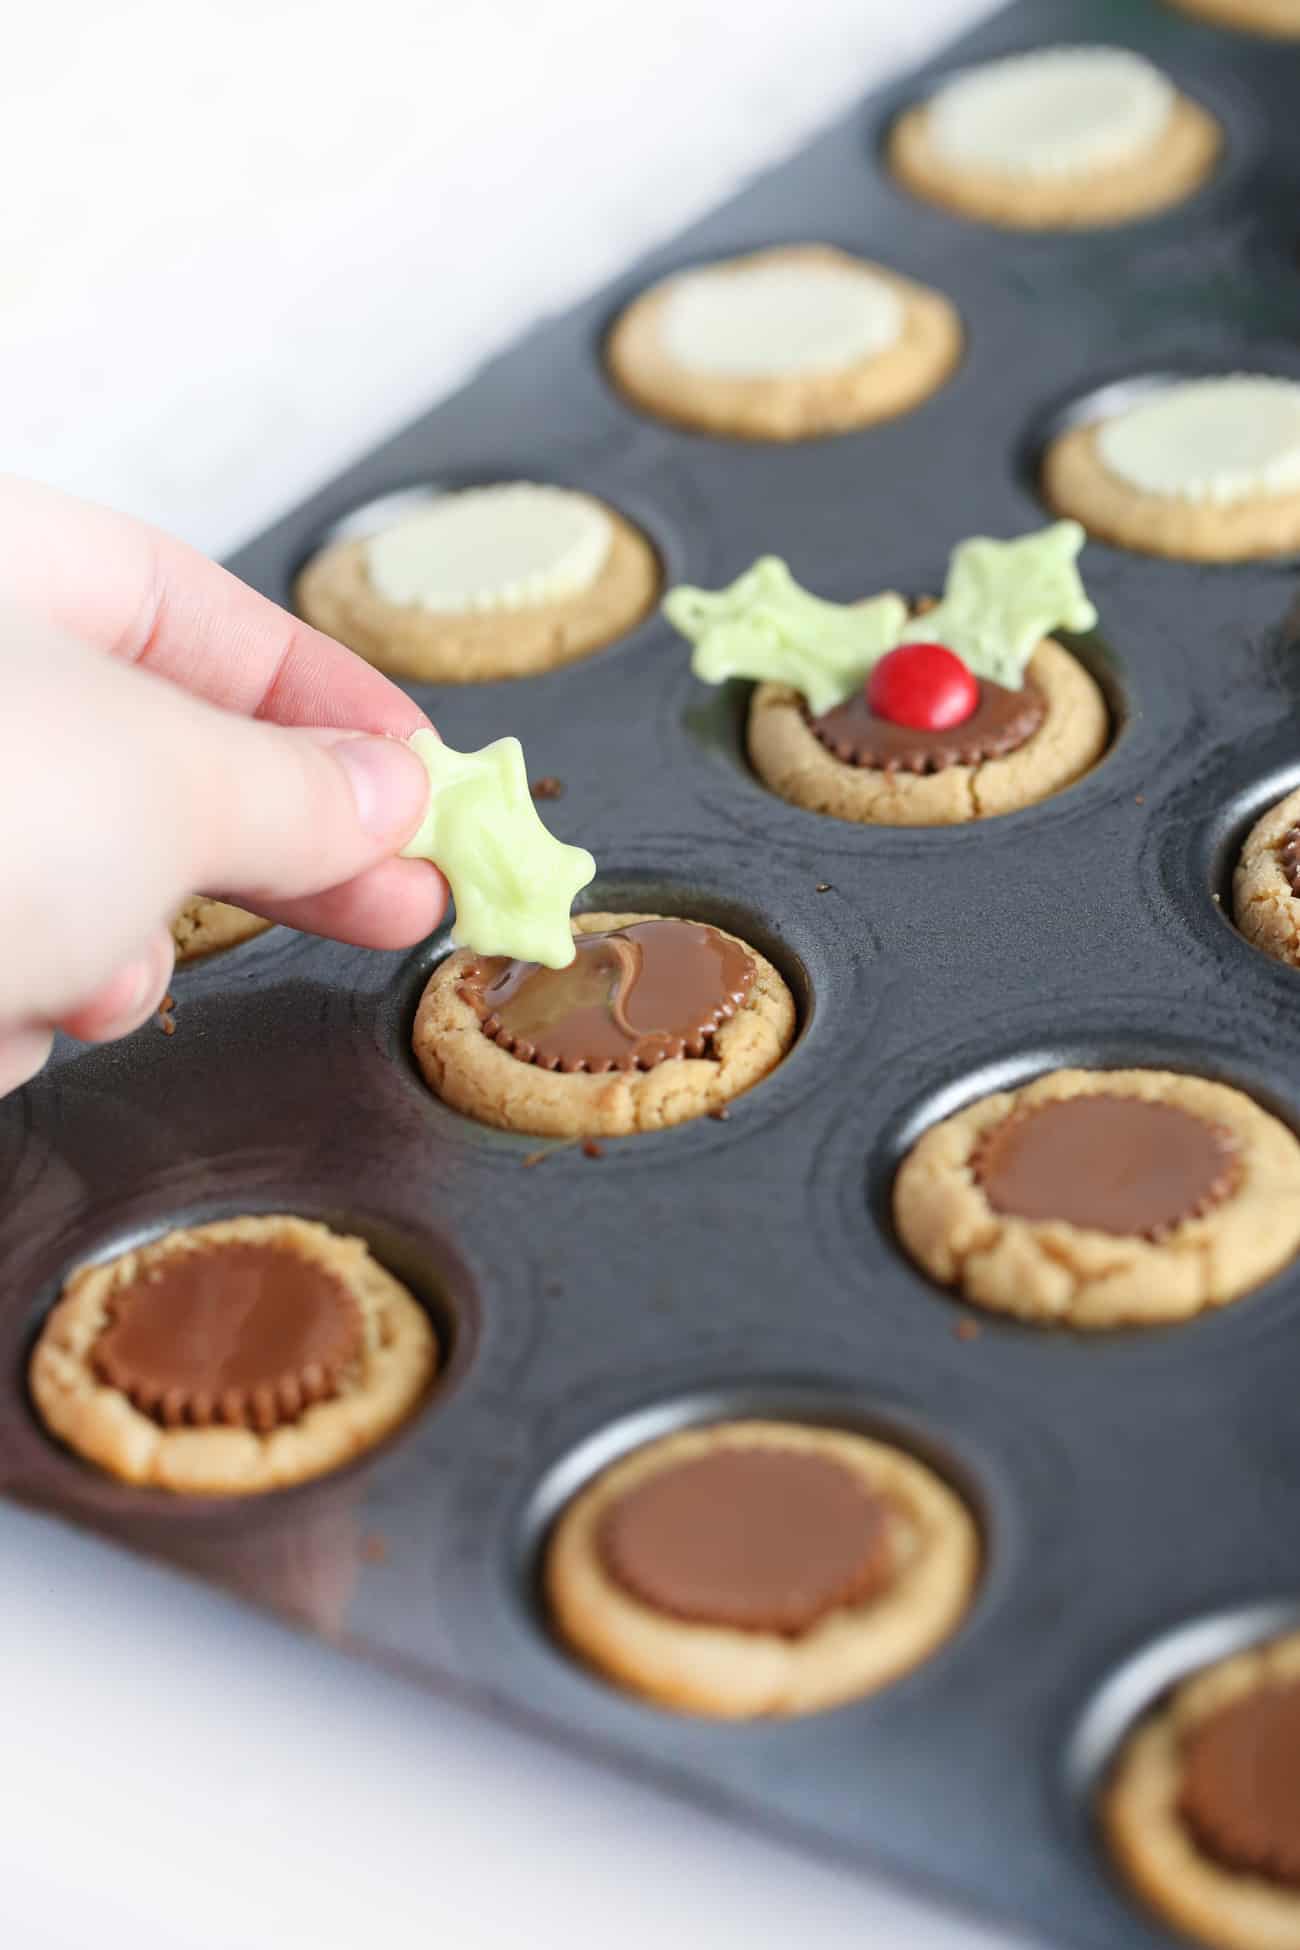 Hand placing white chocolate holly leaf into Reeses peanut butter cup cookie to make easy Christmas holly cookie cups.